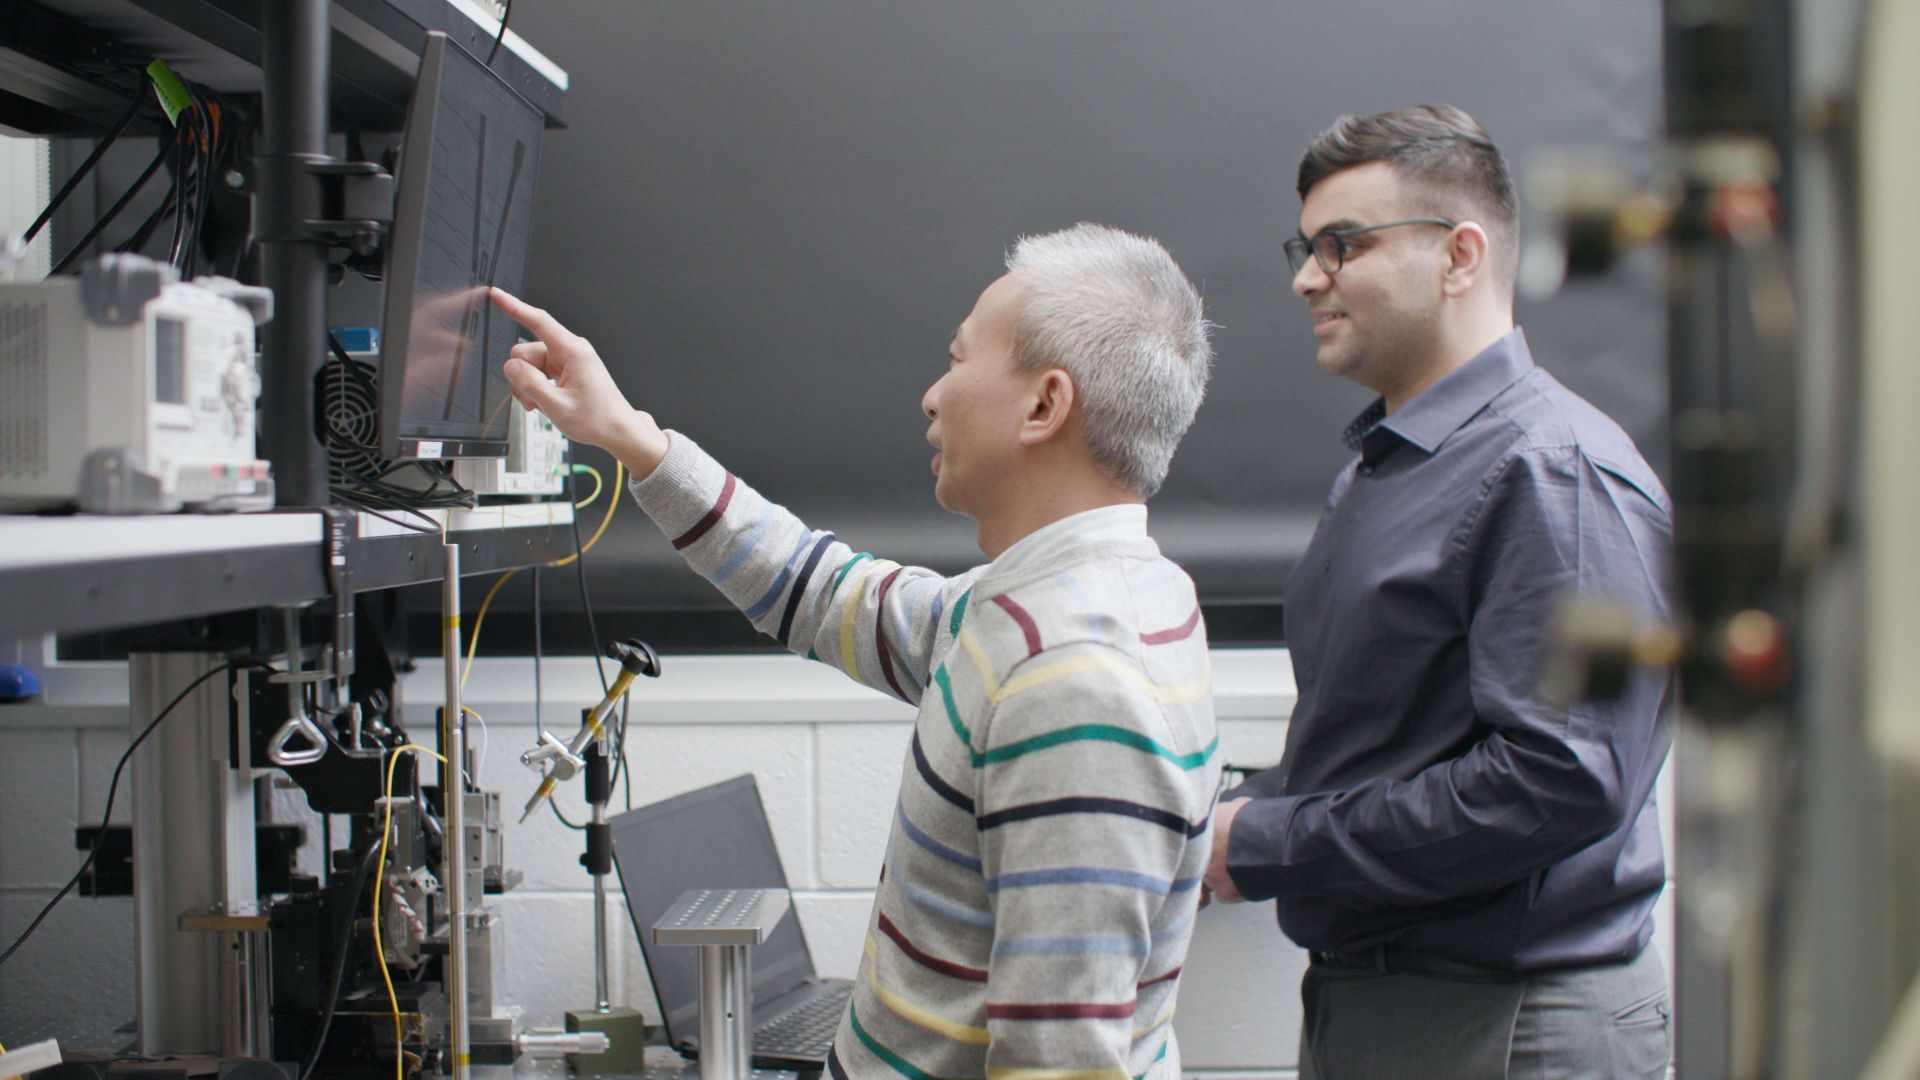 Associate Professor Thach Nguyen showing PhD researcher Aditya Vashi the design of a light-powered chip at RMIT's Integrated Photonics and Applications Centre (InPAC).